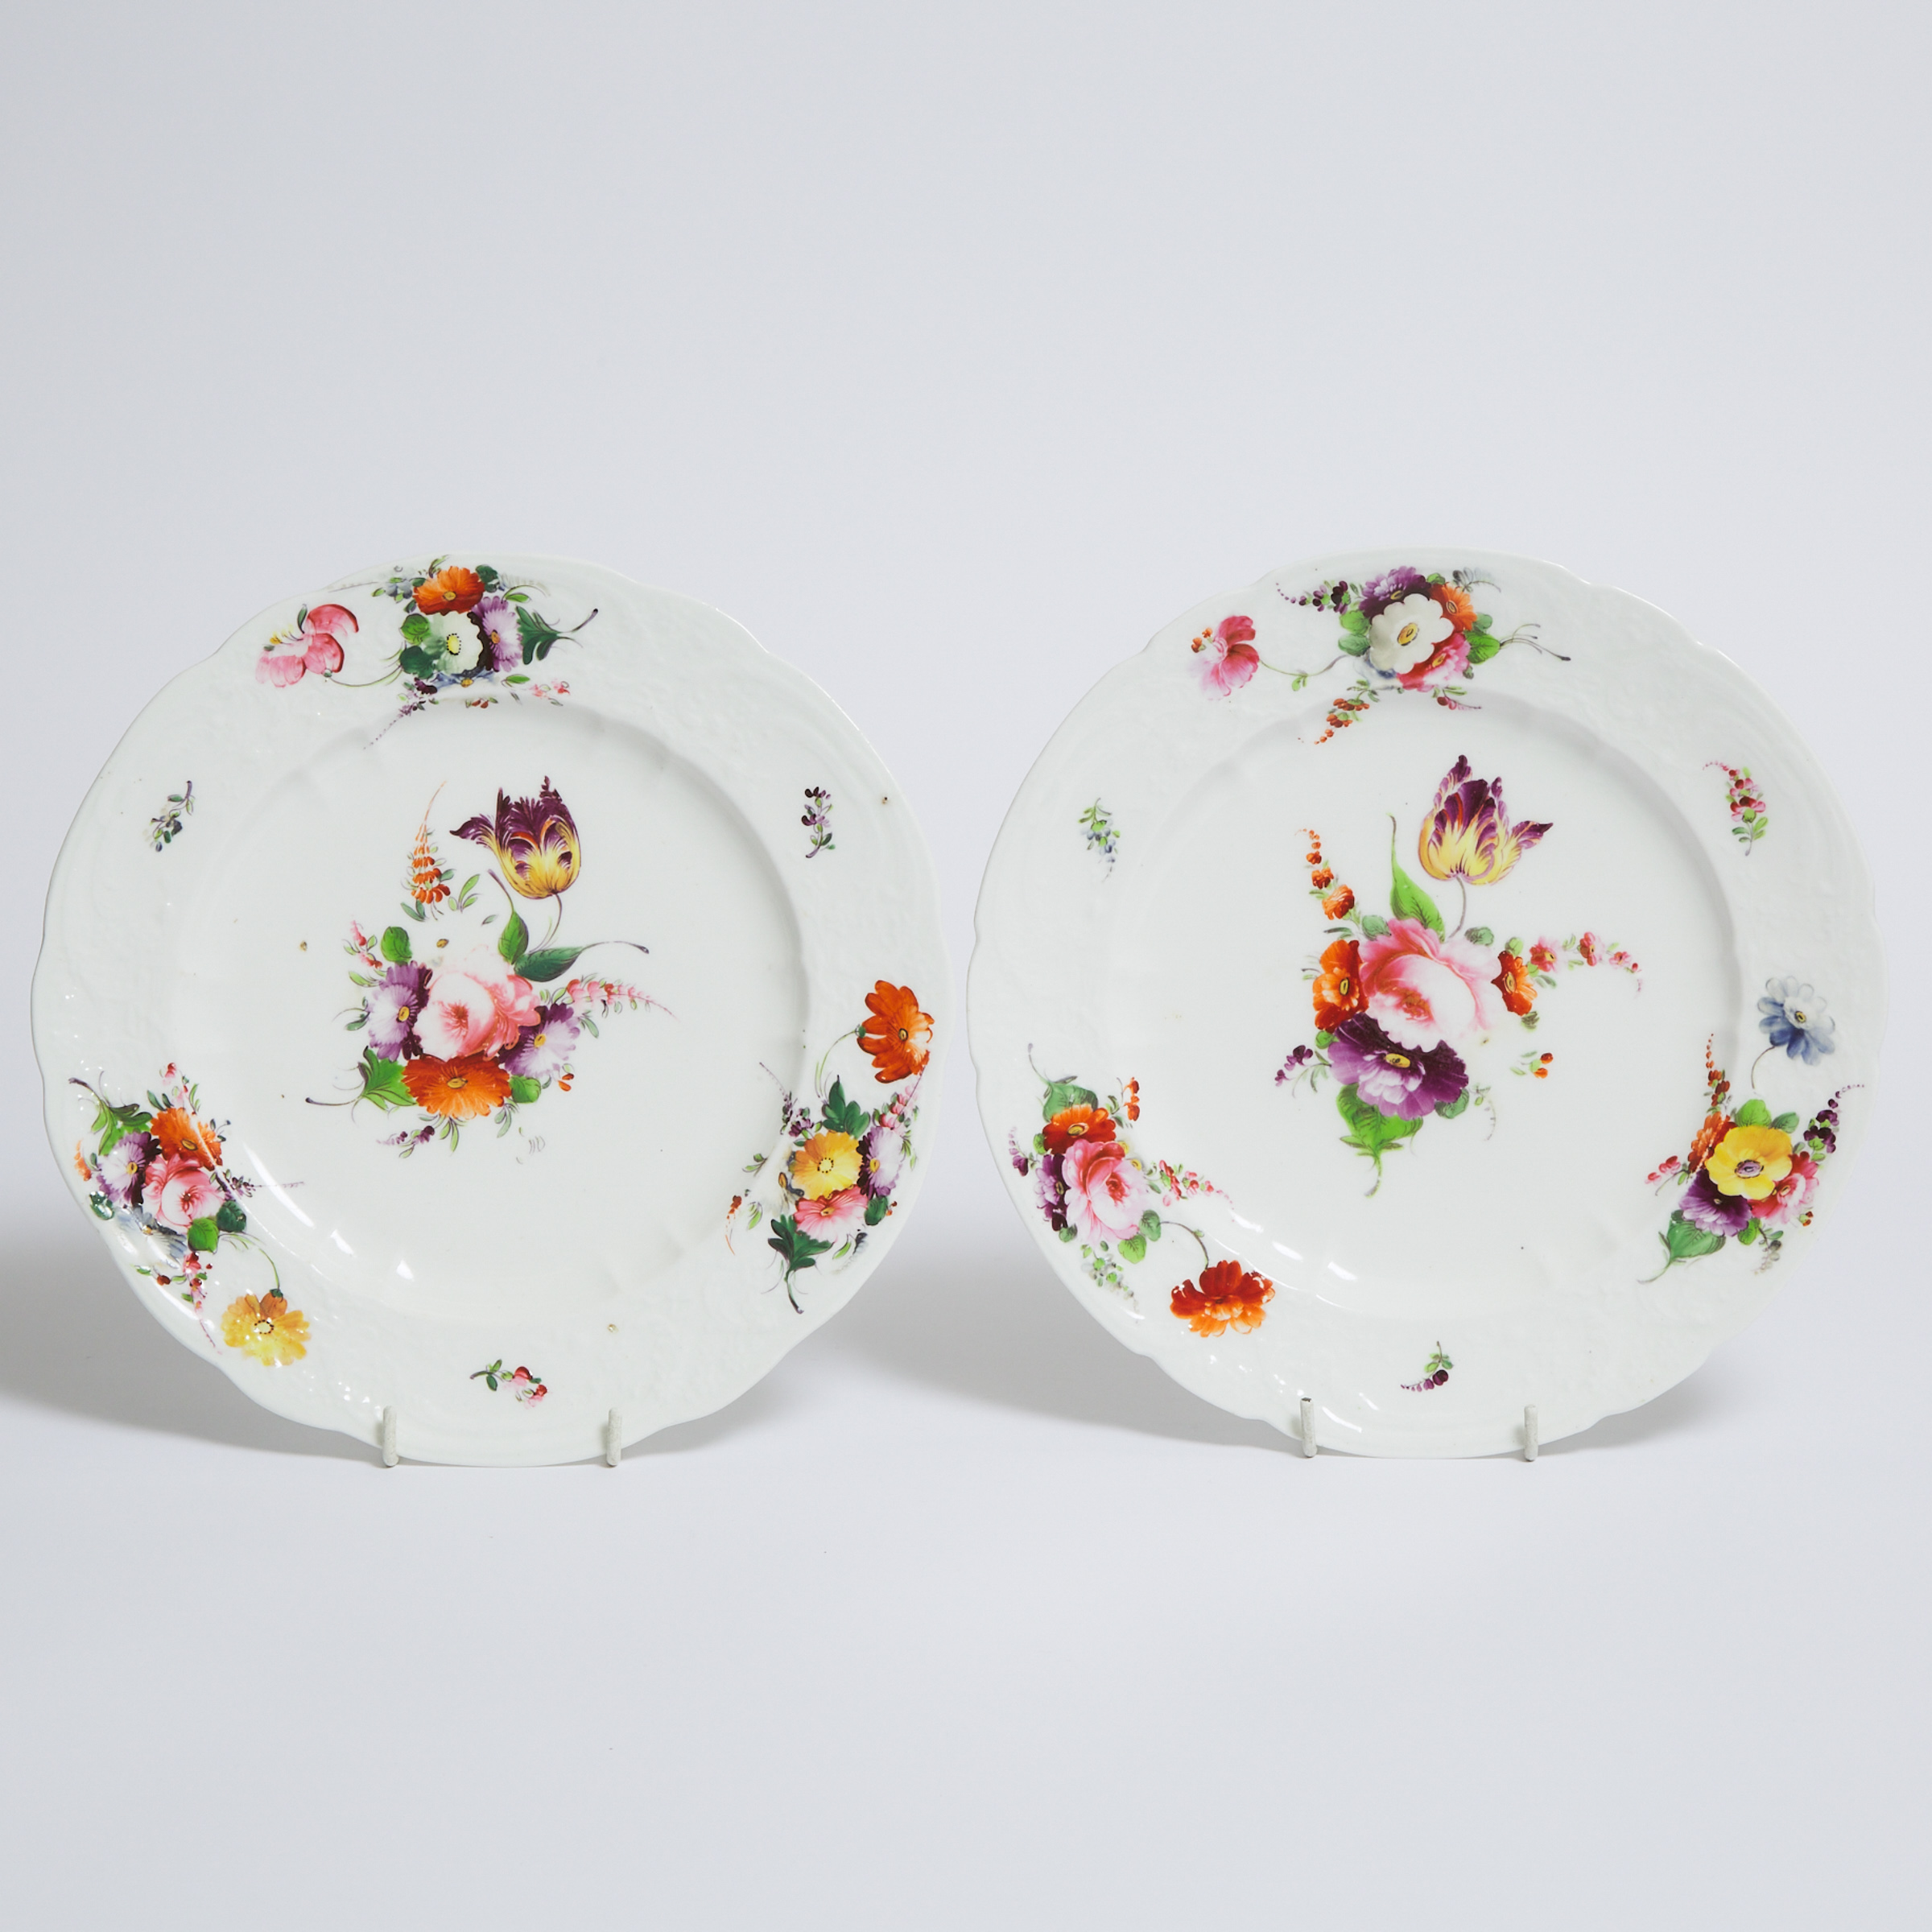 Pair of English Porcelain Moulded and Painted Plates, probably Swansea, c.1820